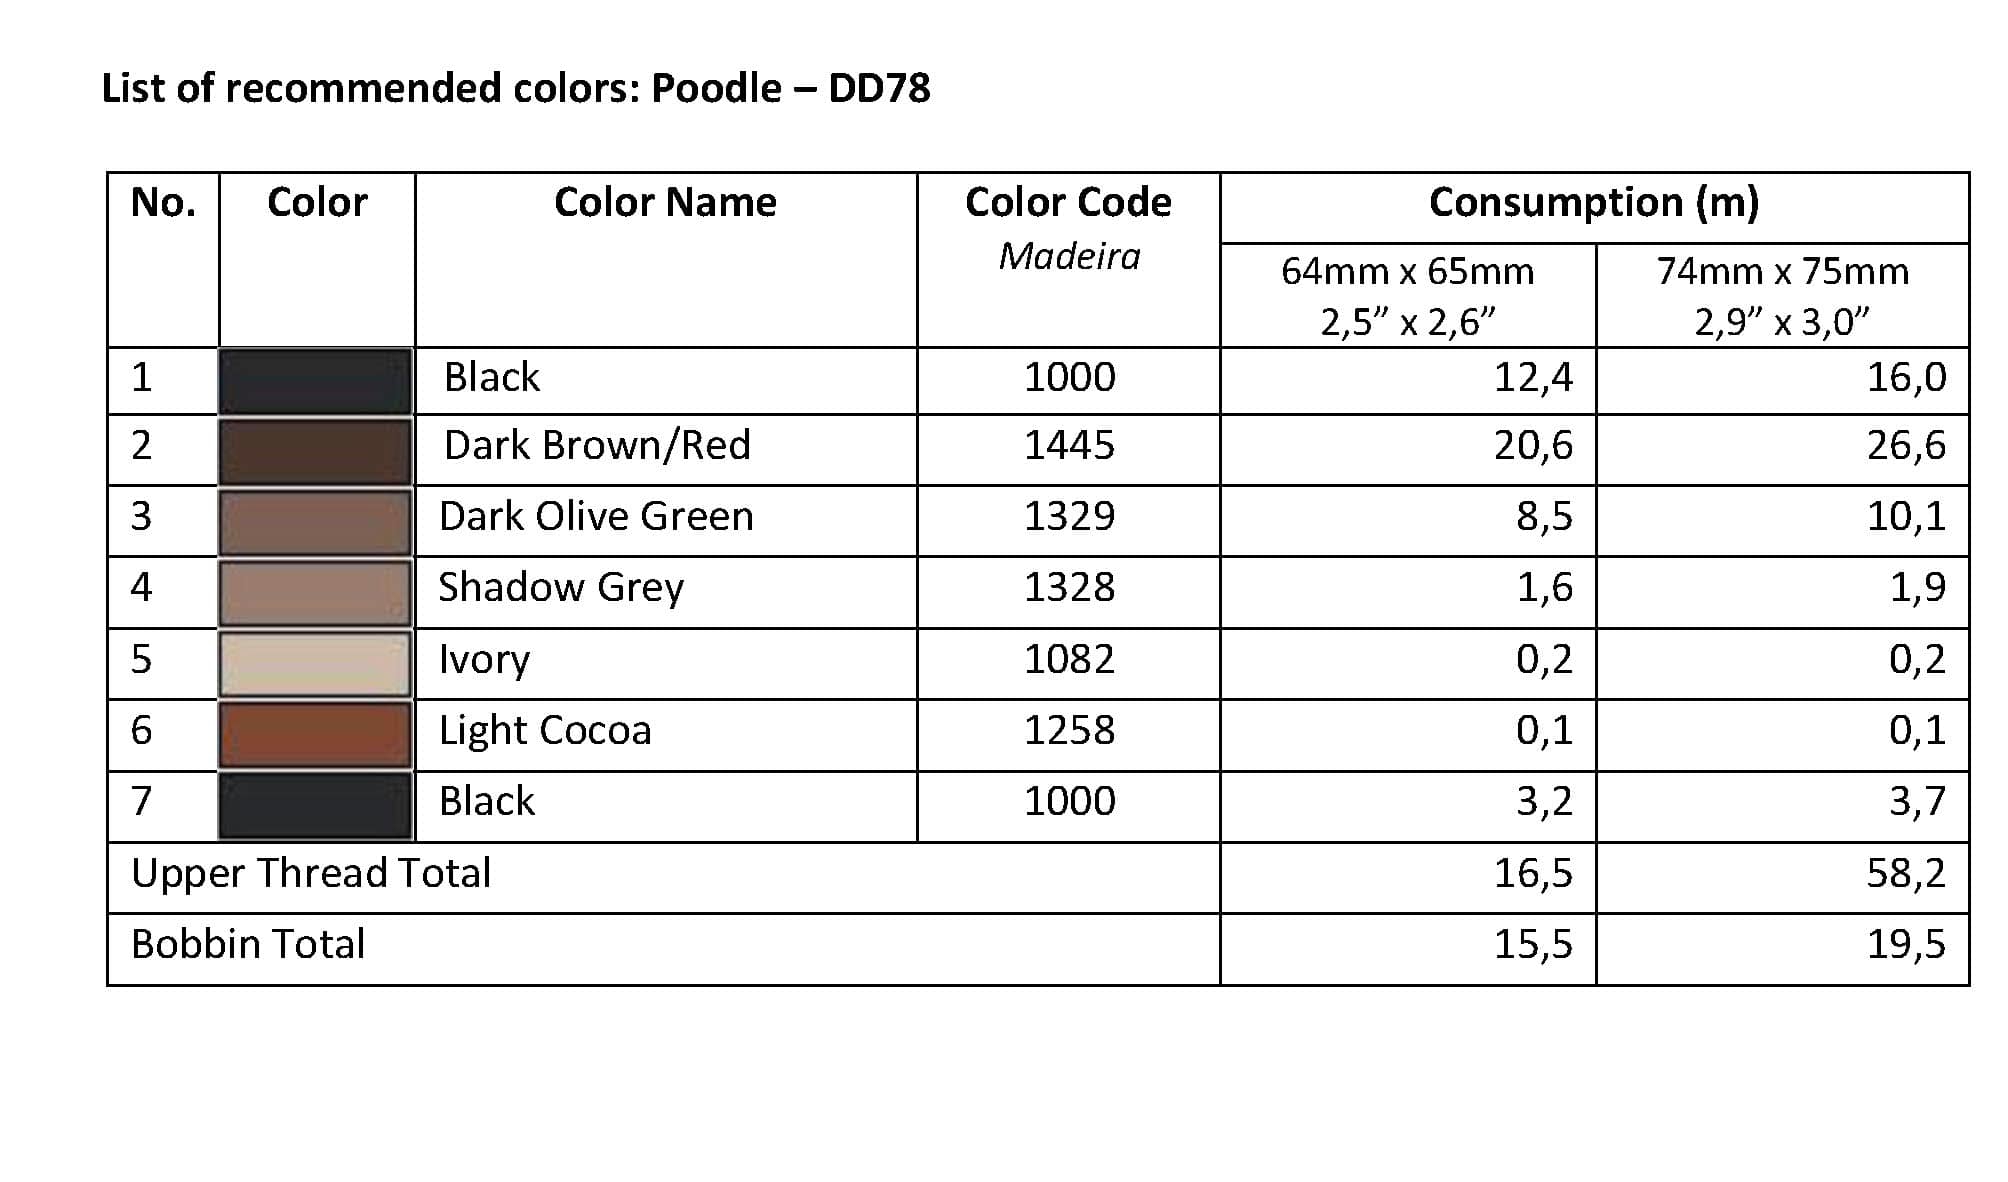 List of Recommended Colors -  Poodle DD78